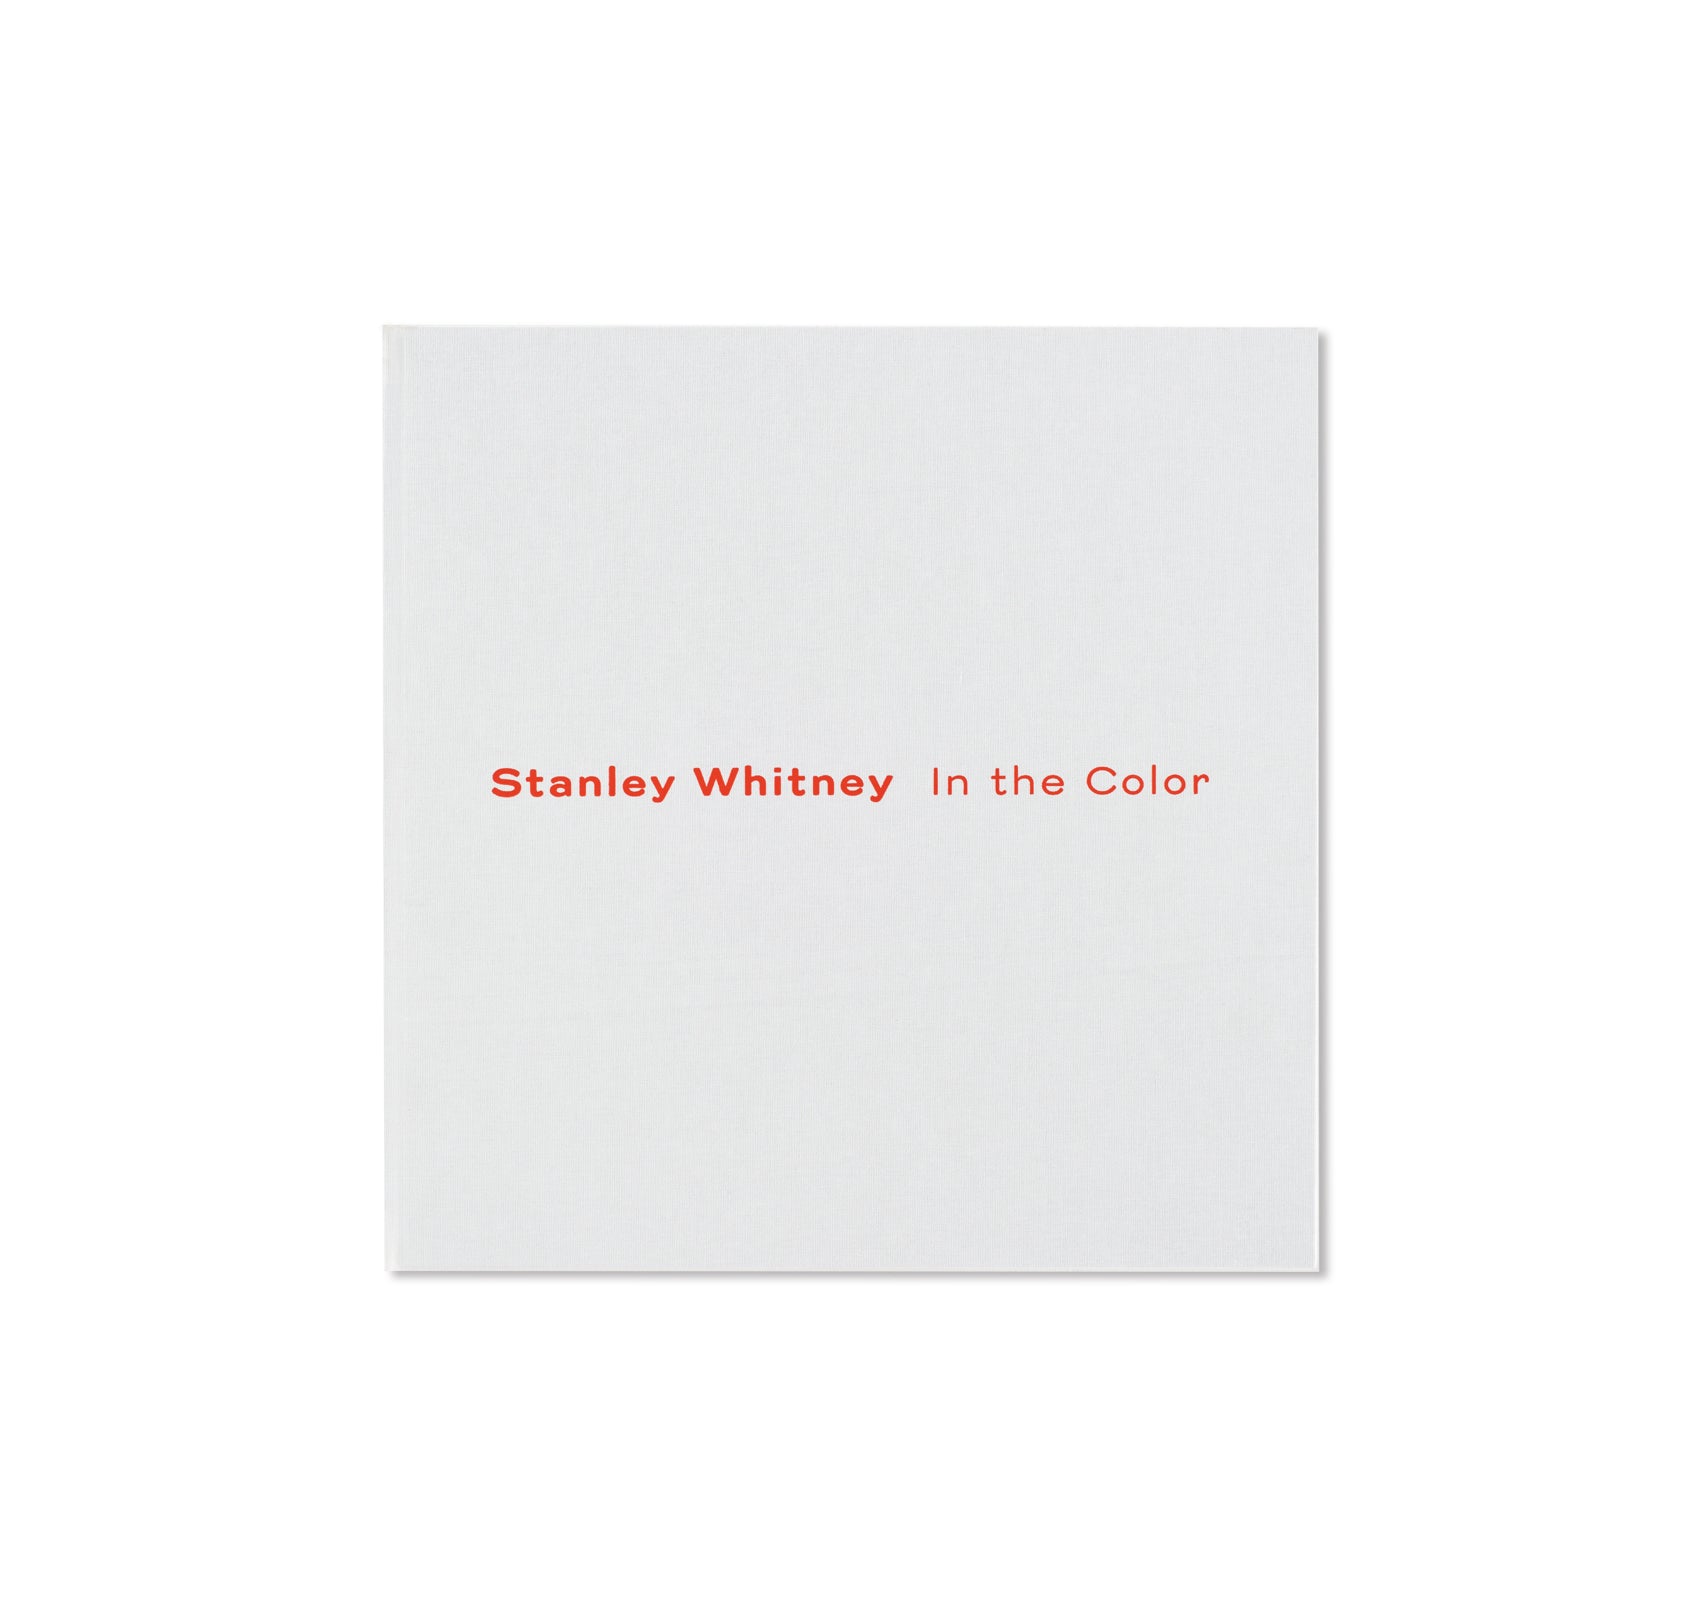 IN THE COLOR by Stanley Whitney